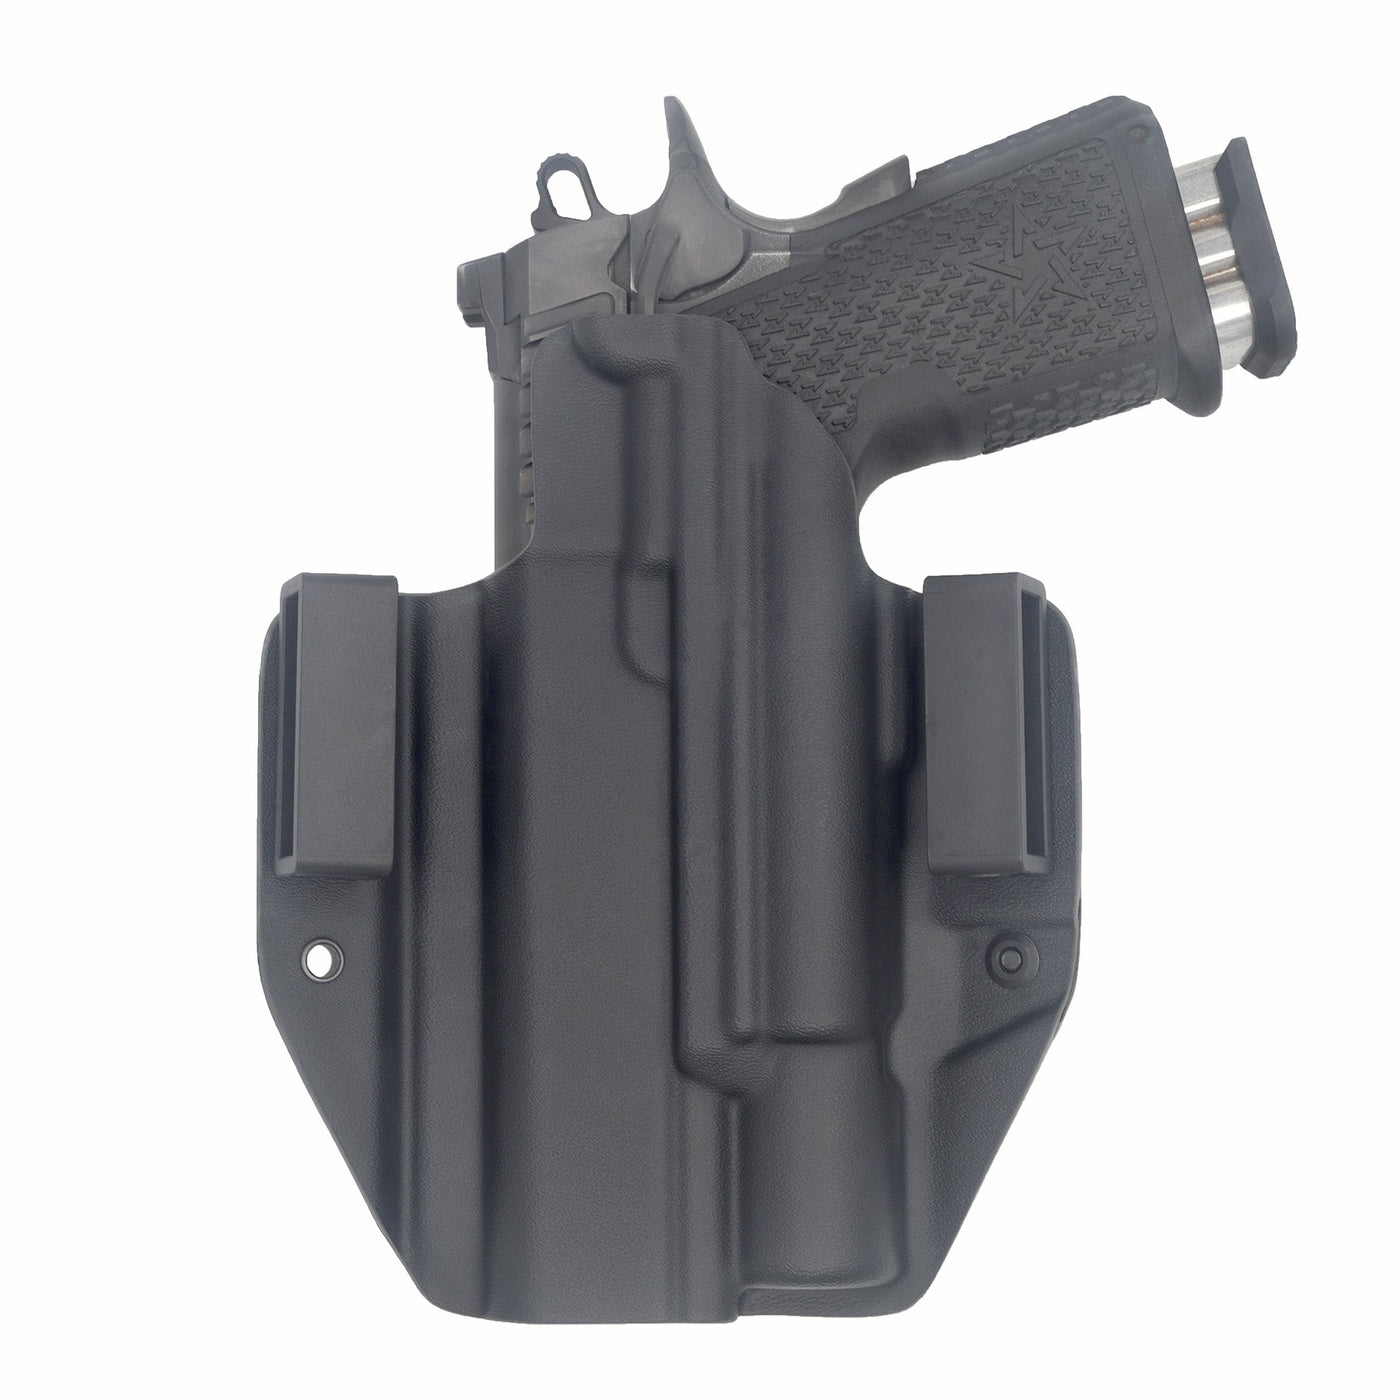 C&G Holsters Quickship OWB Tactical 1911 DS Prodigy Surefire X300 in holstered position back view